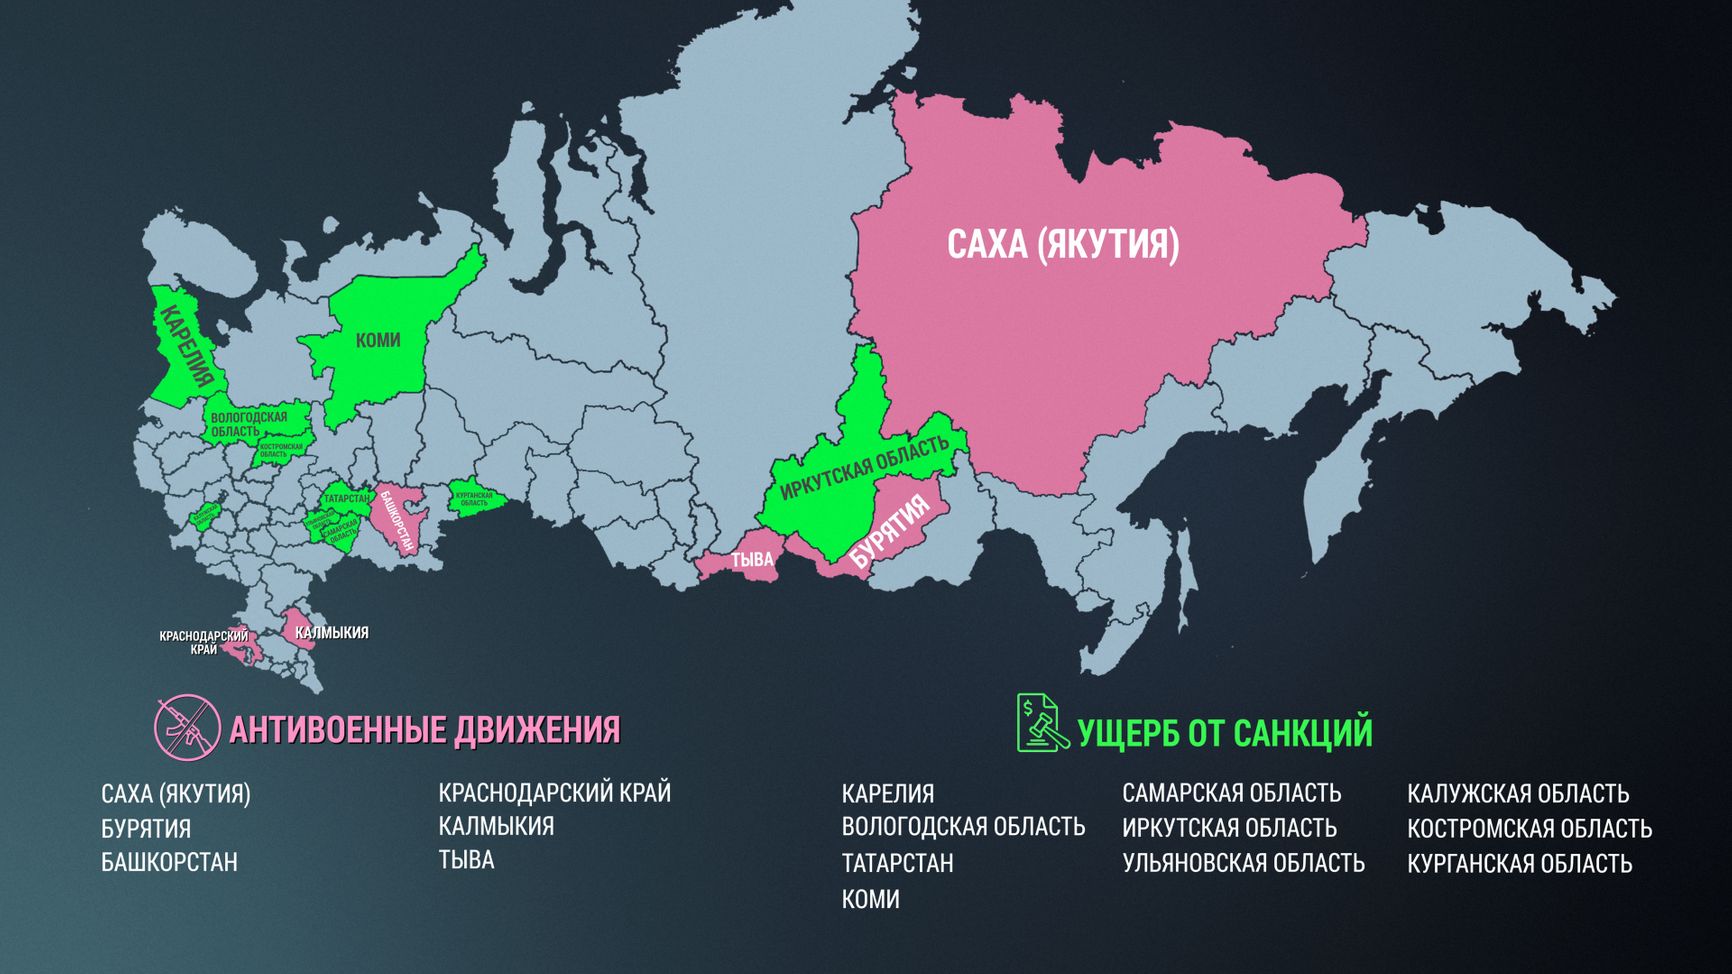 Russian regions that have antiwar movements (pink) and have suffered damage from international sanctions (green)